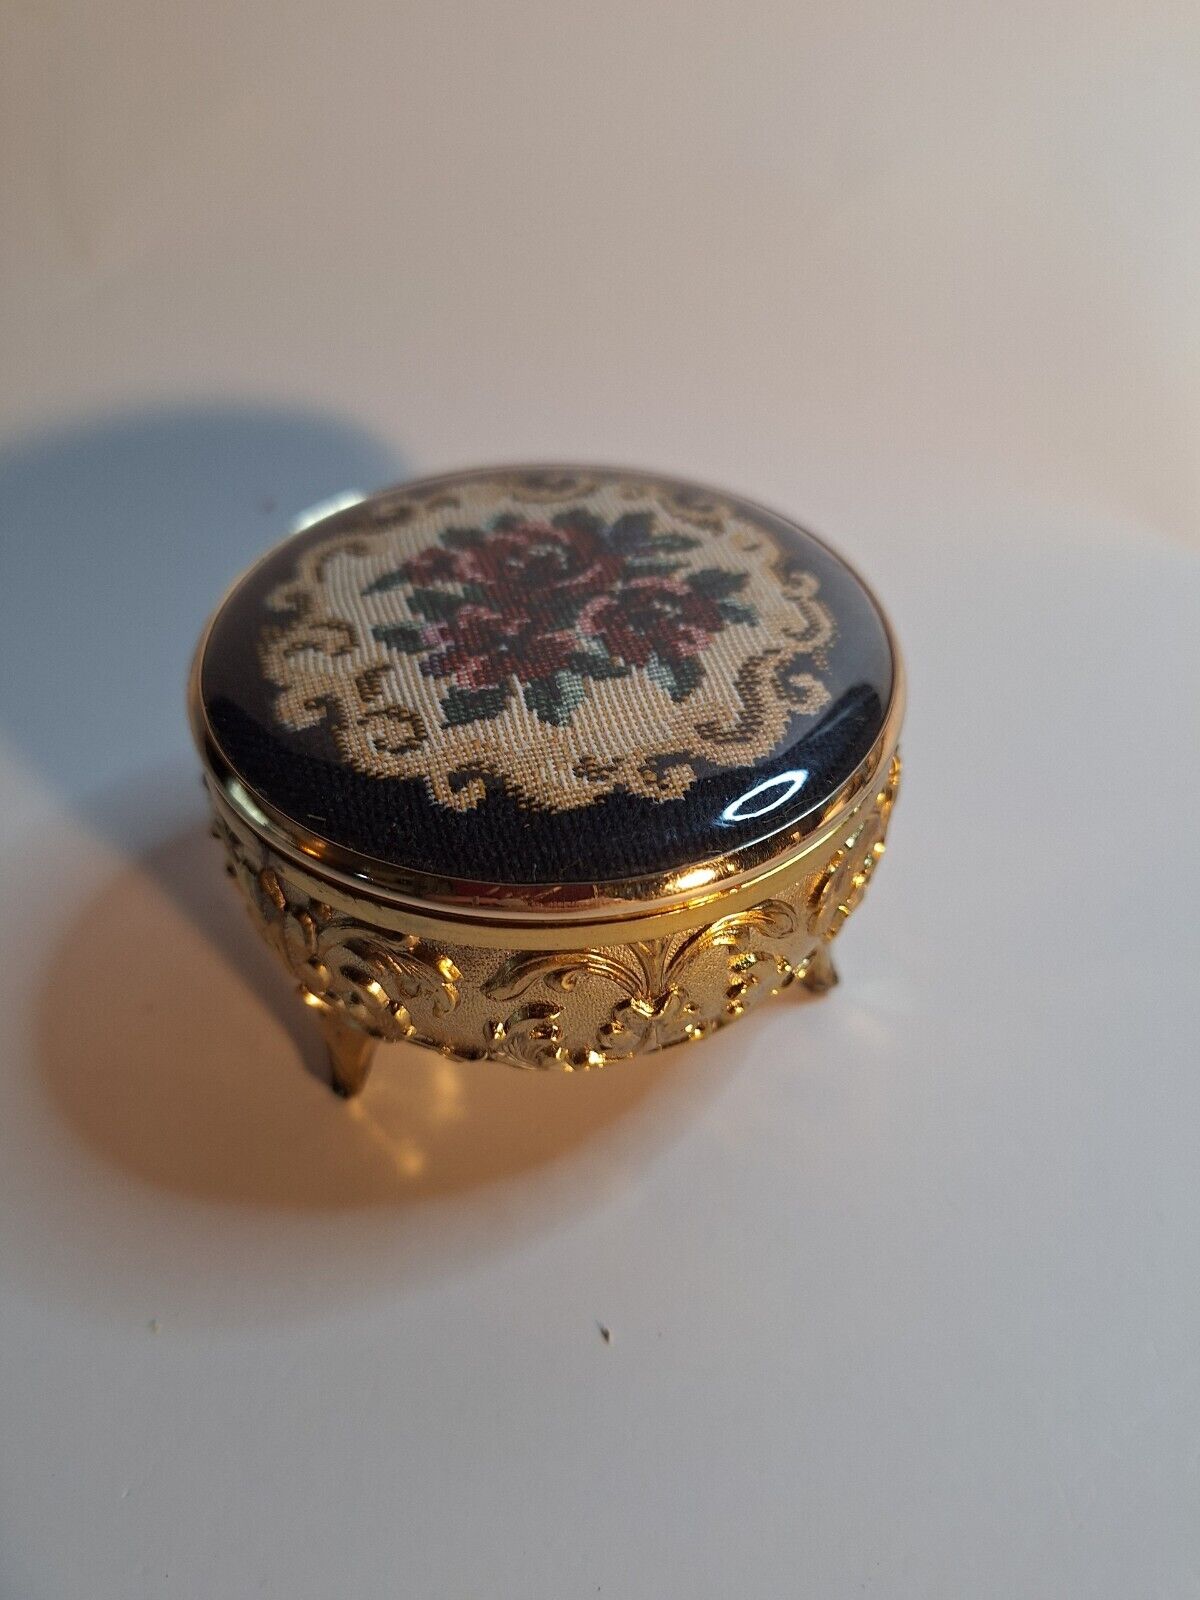 Vintage Round Footed Trinket Box With Mirror And Red Velvet Lining